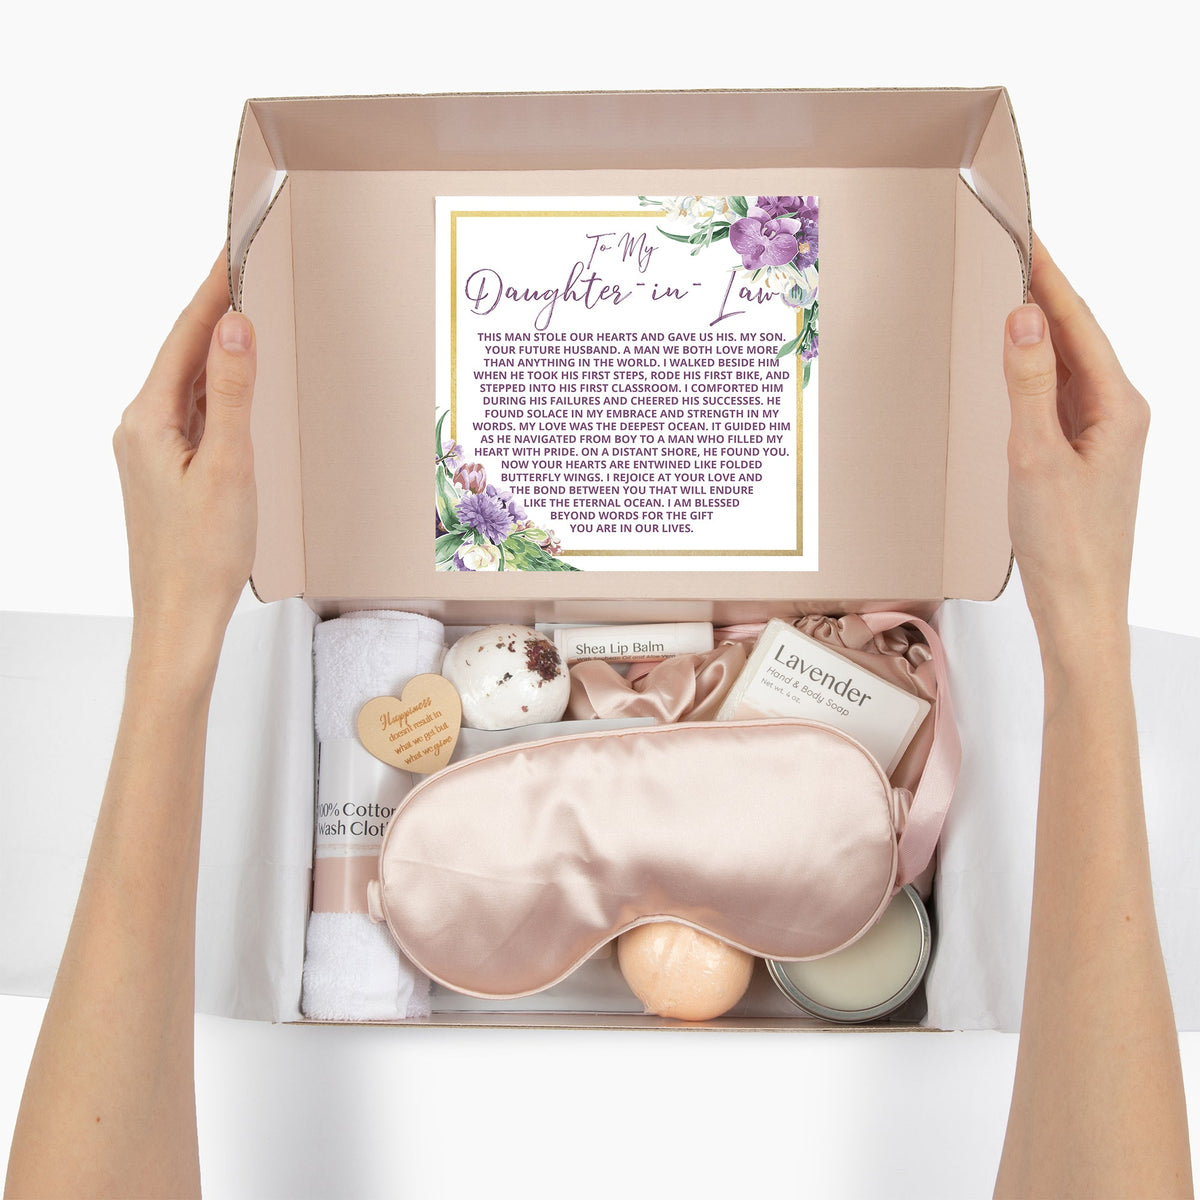 Indulgent Luxury Spa Gift Box for Daughter-In-Law